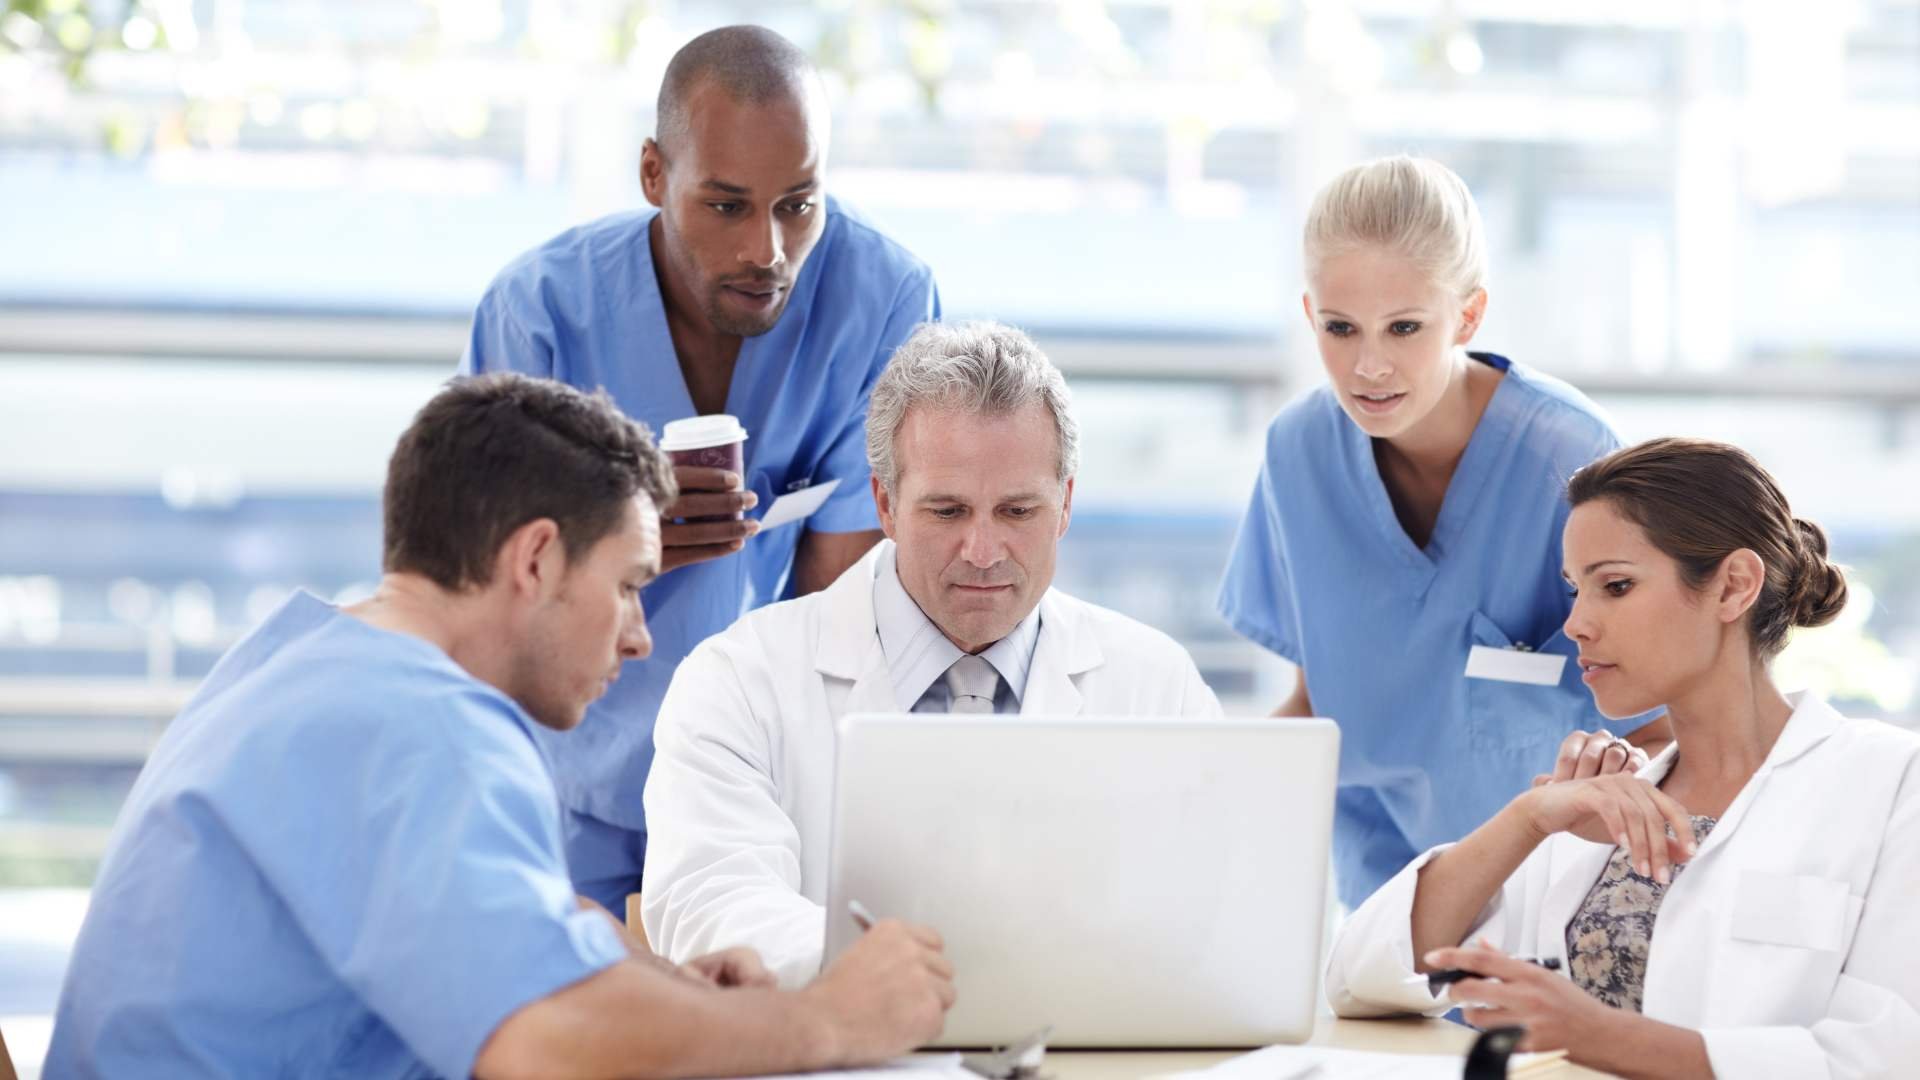 e-learning healthcare strategy feedback opportunities